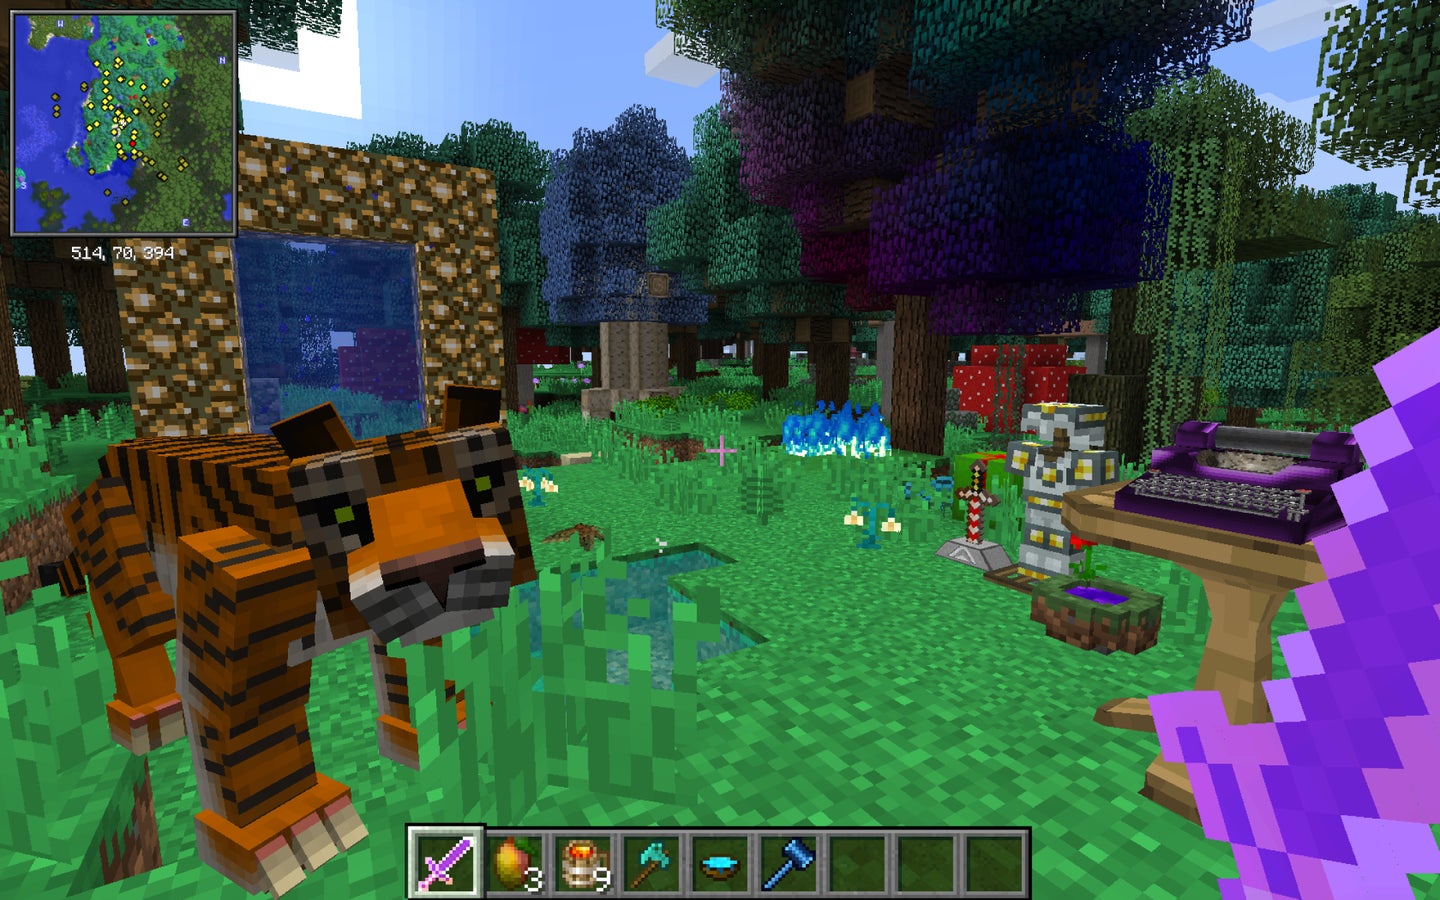 A Minecraft world with multiple mods installed, and a tiger in the foreground.